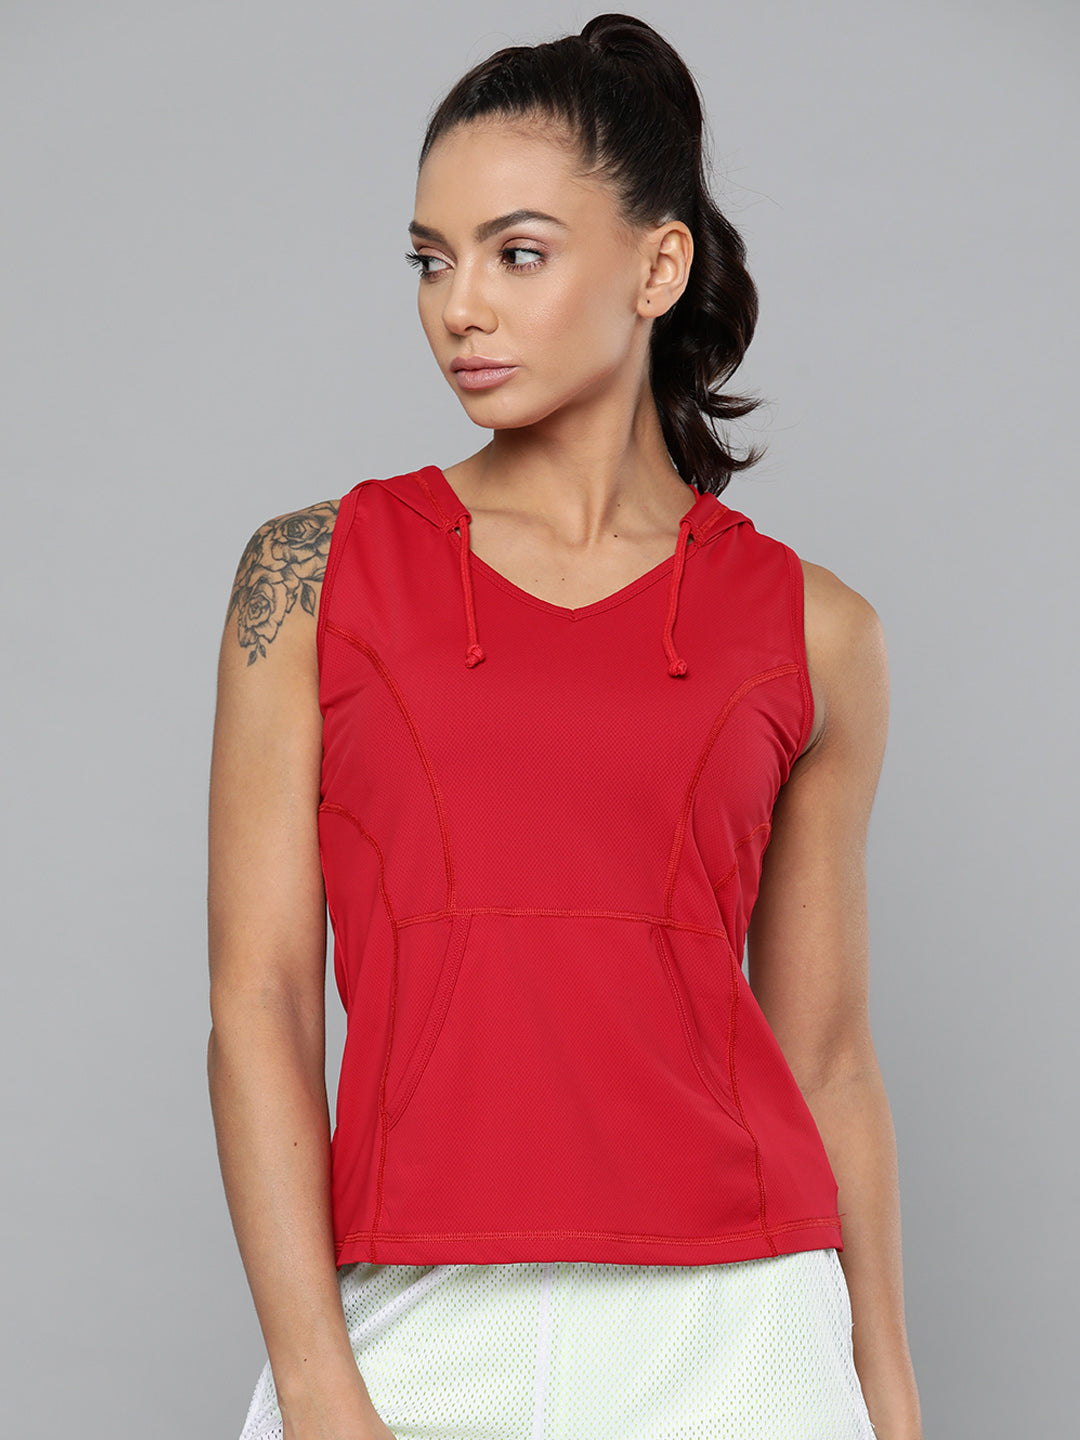 Women's Red Loose Training or Gym Hooded T-shirt – Fitkin